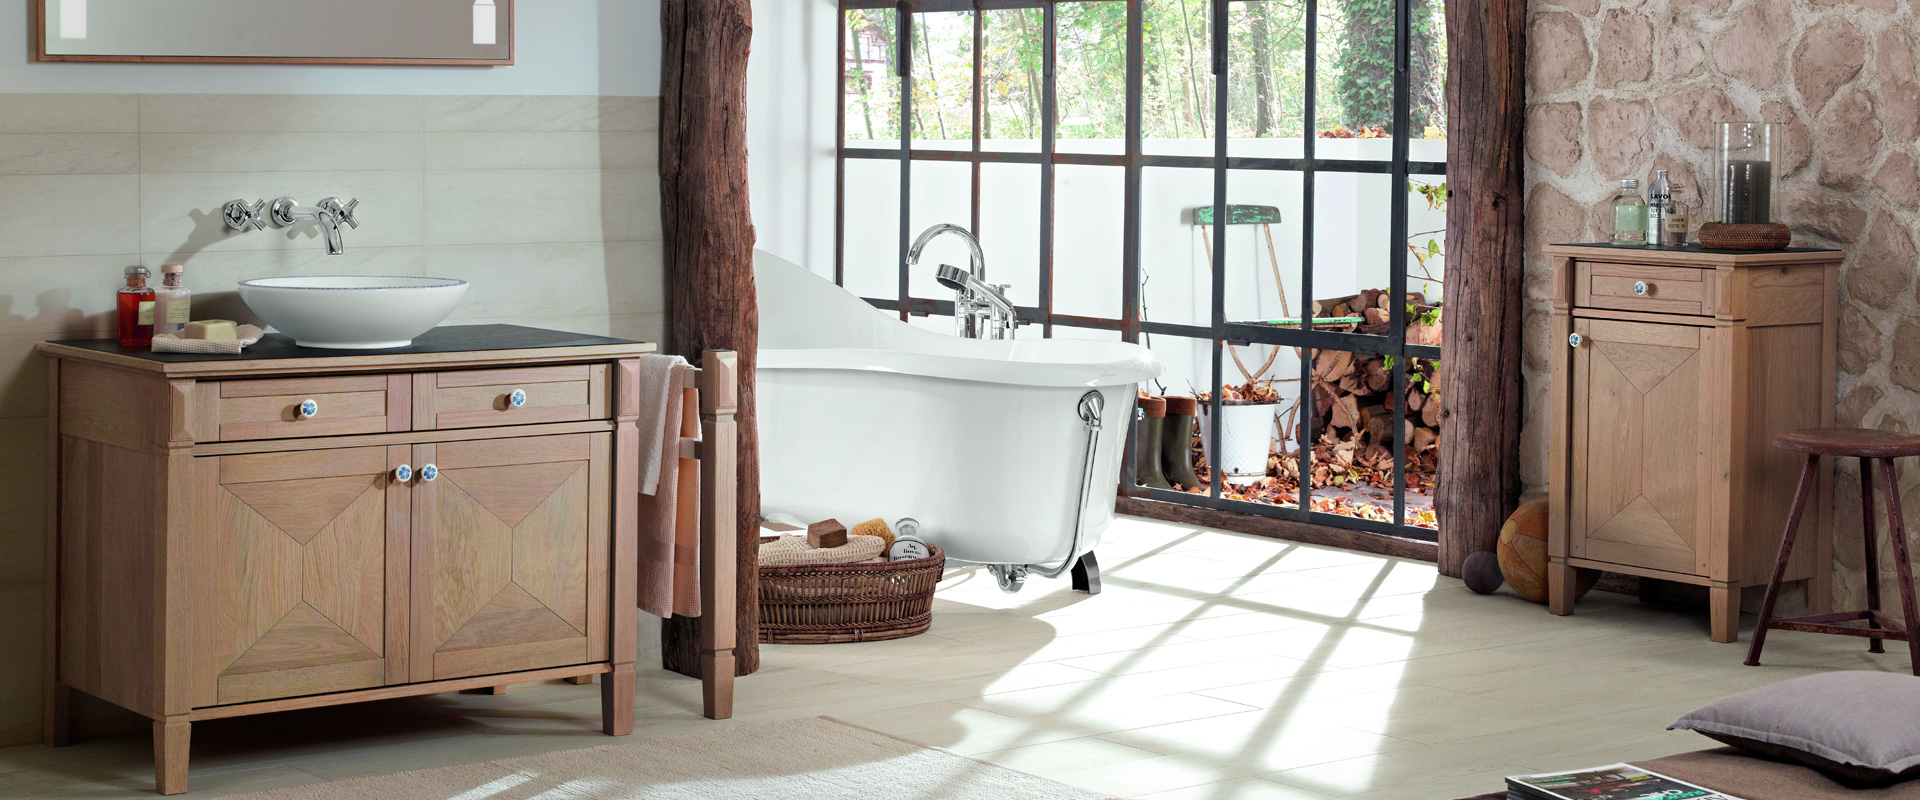 Wooden Bath Furniture Care Recommendations Villeroy Boch with size 1920 X 800